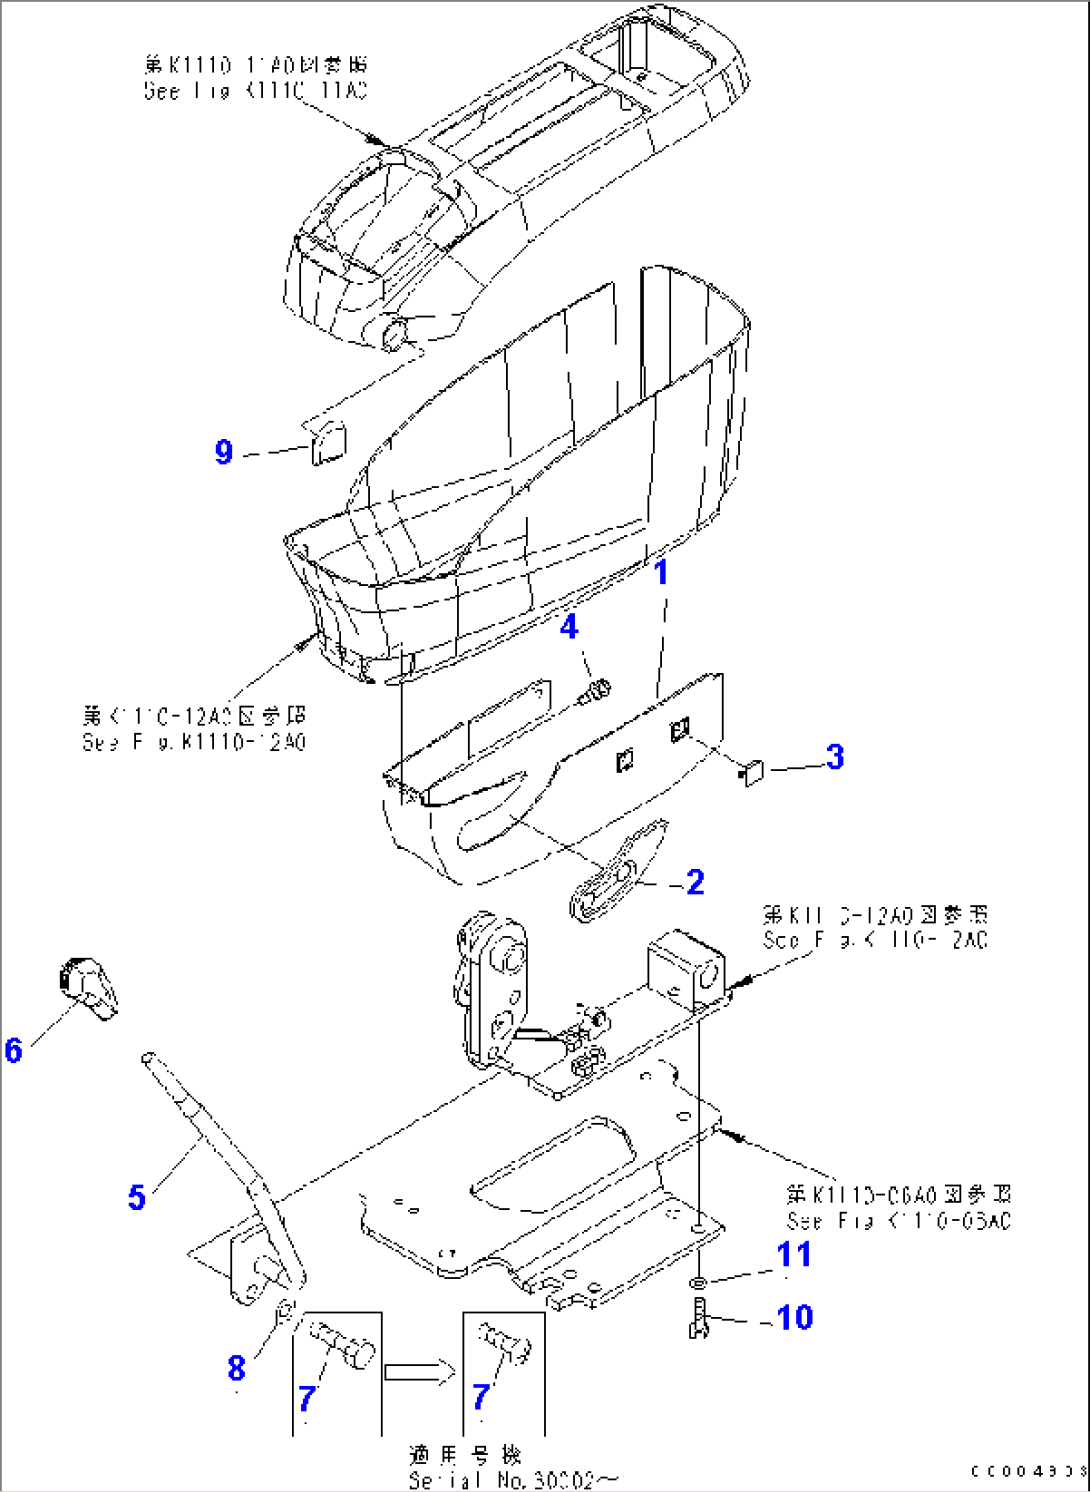 FLOOR FRAME (CONSOLE) (UNDER) (L.H.)